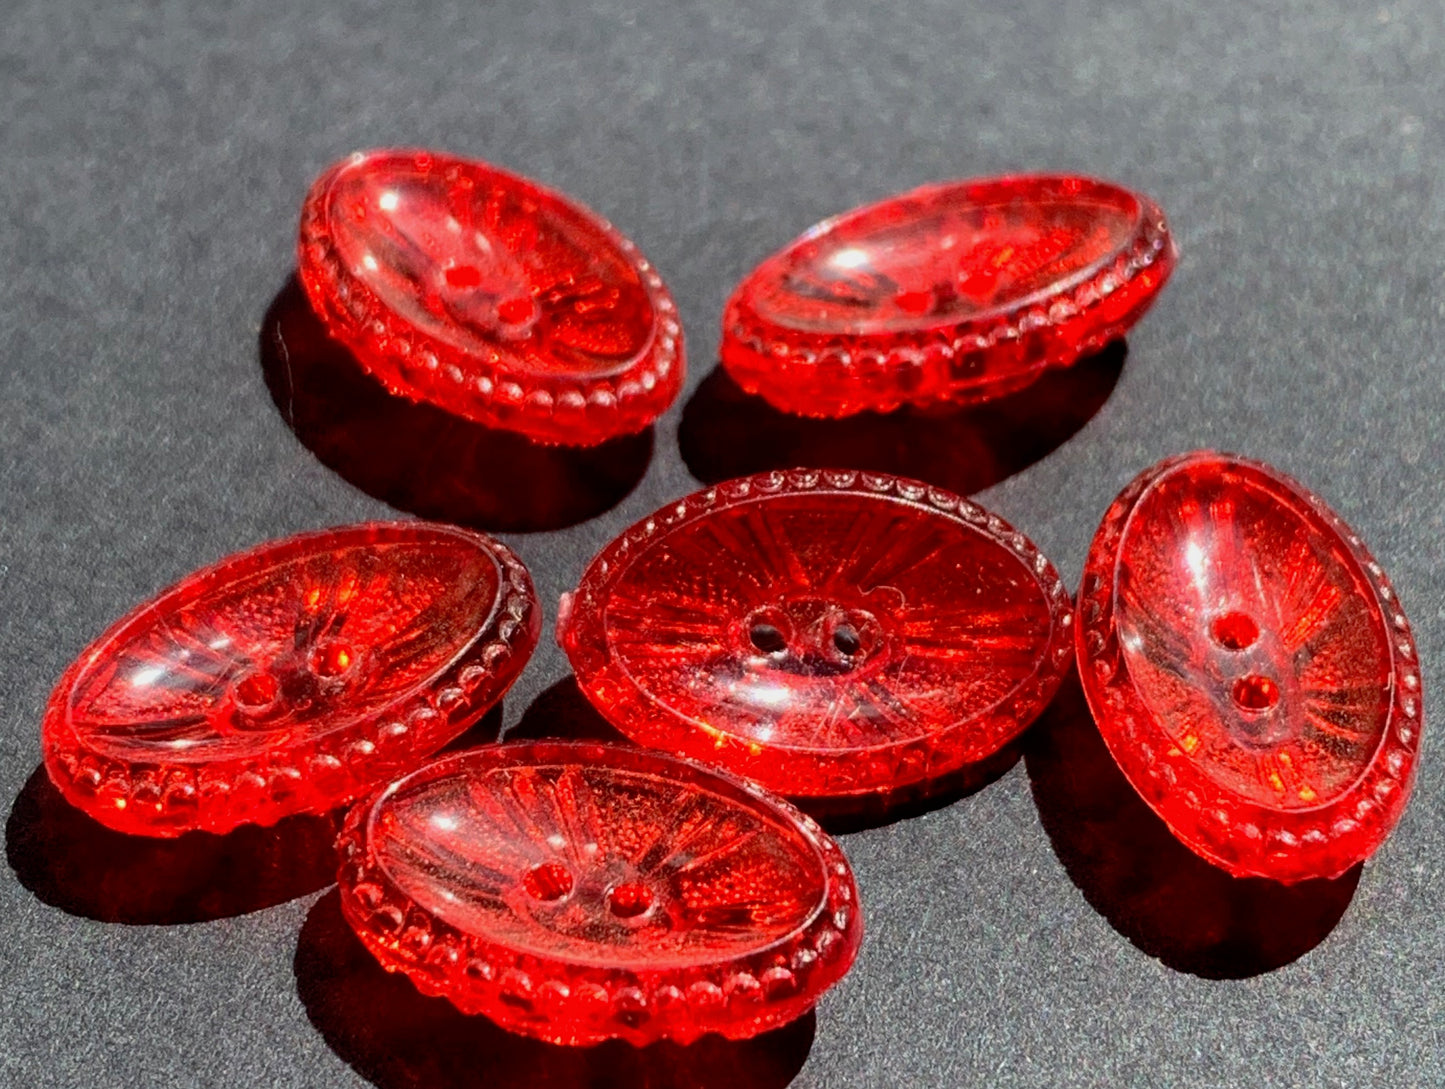 6 Elliptical Jewel Red Vintage Buttons 13 or 15mm long